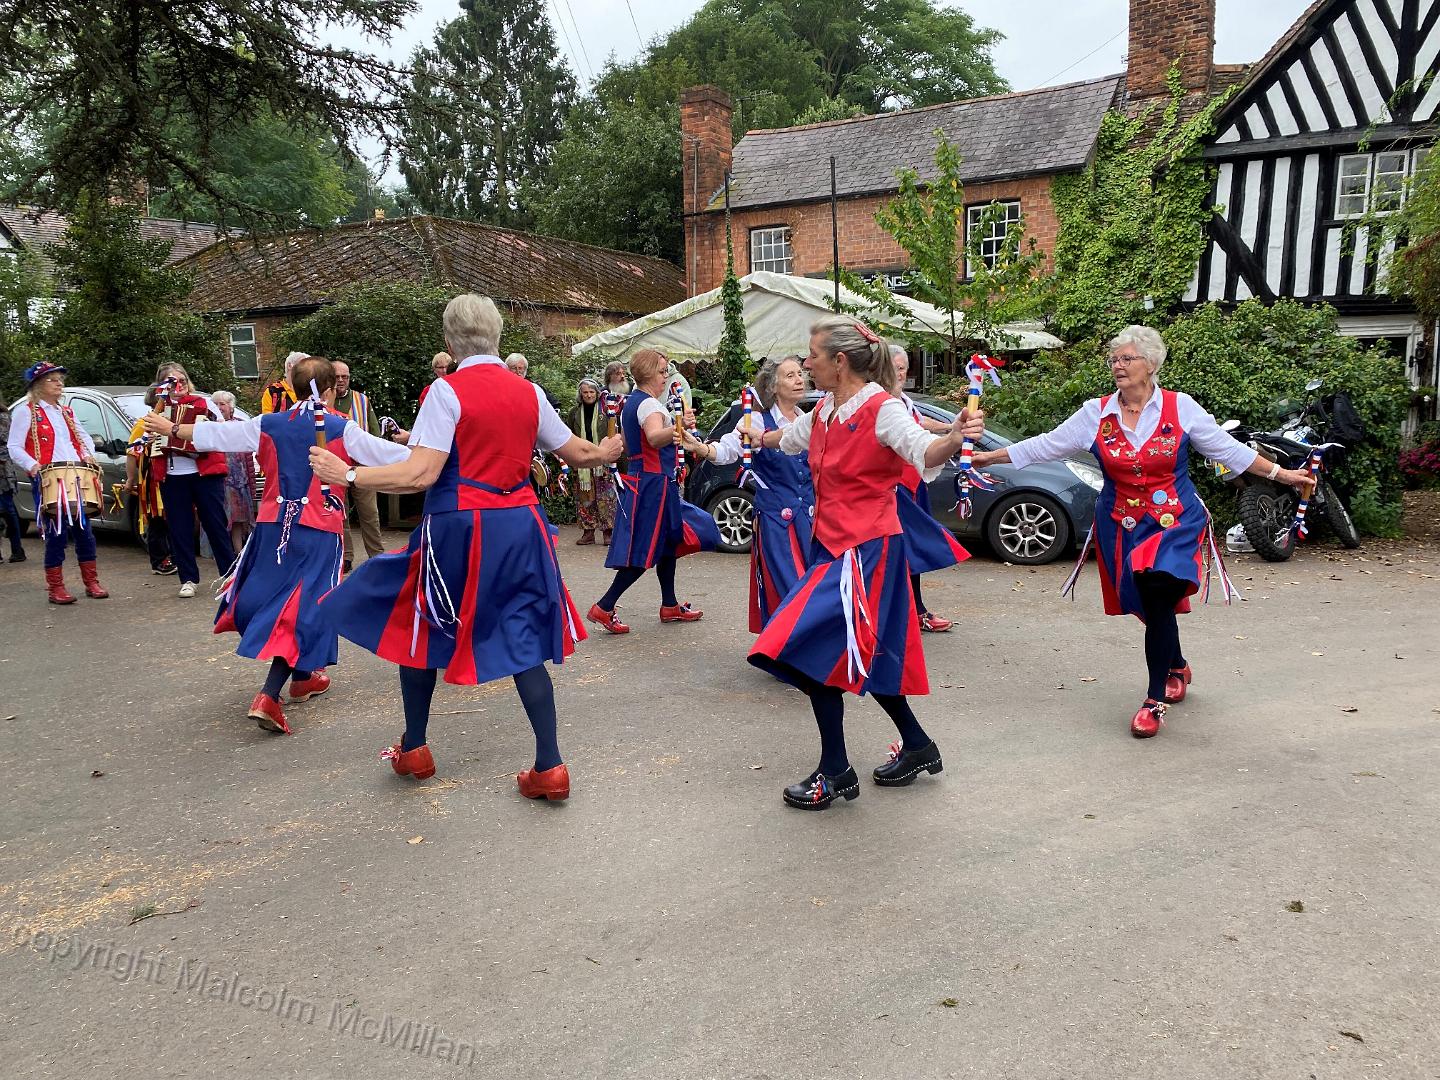 dancing the 'roundabout' in 'Alvechurch'